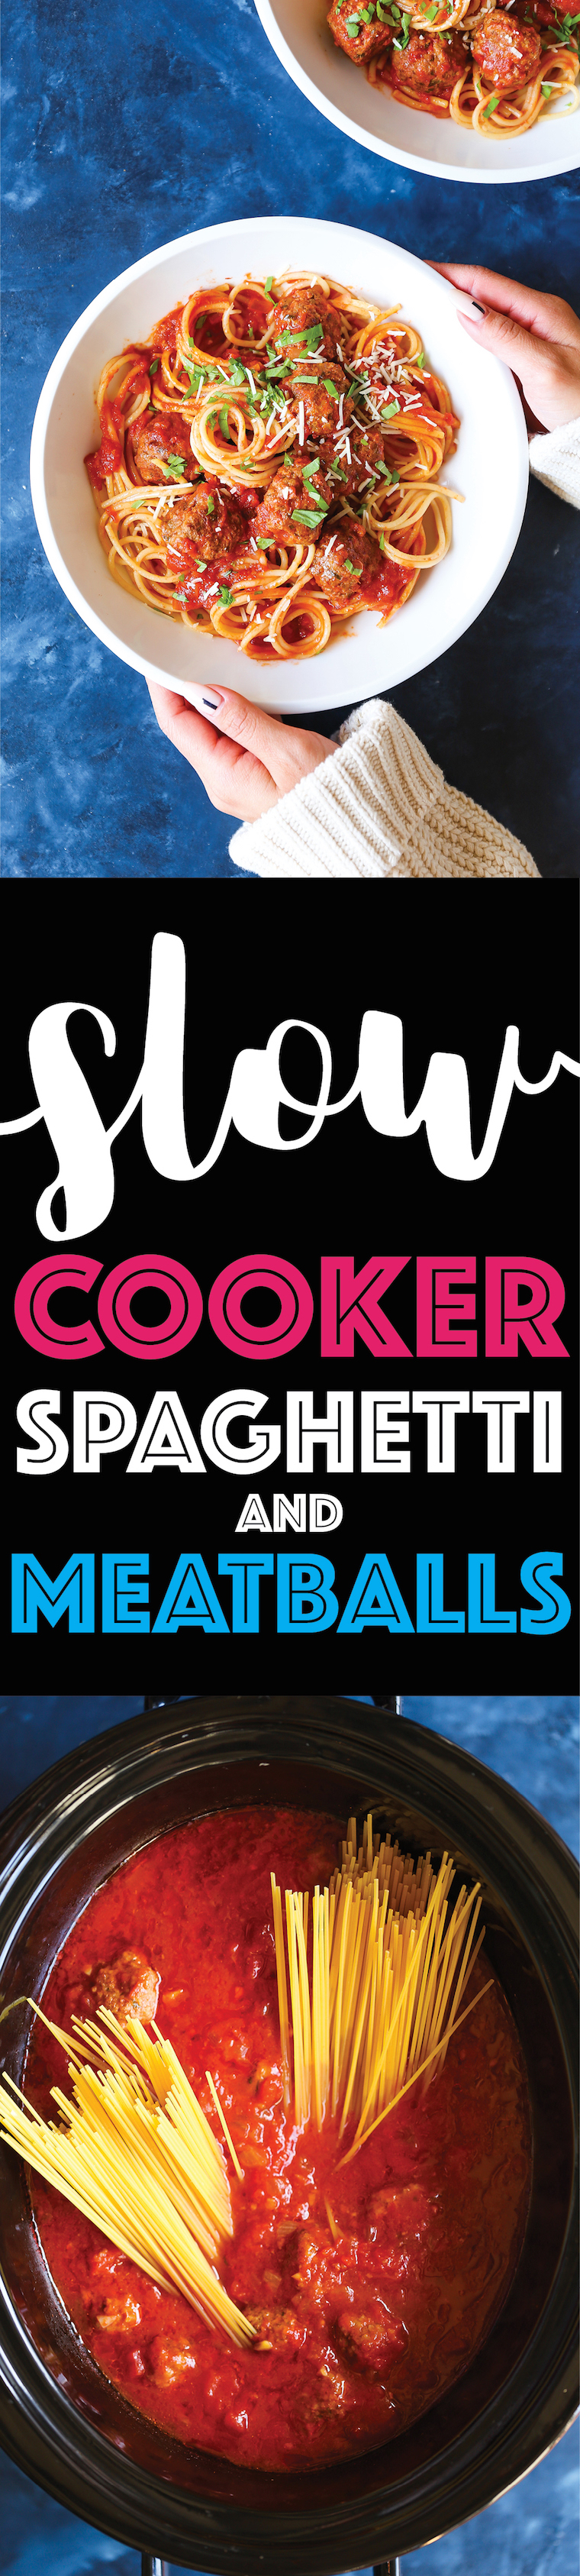 Slow Cooker Spaghetti and Meatballs - This is the ONLY way to make this! Even the pasta gets cooked right in the crockpot! SO stinking easy, right?